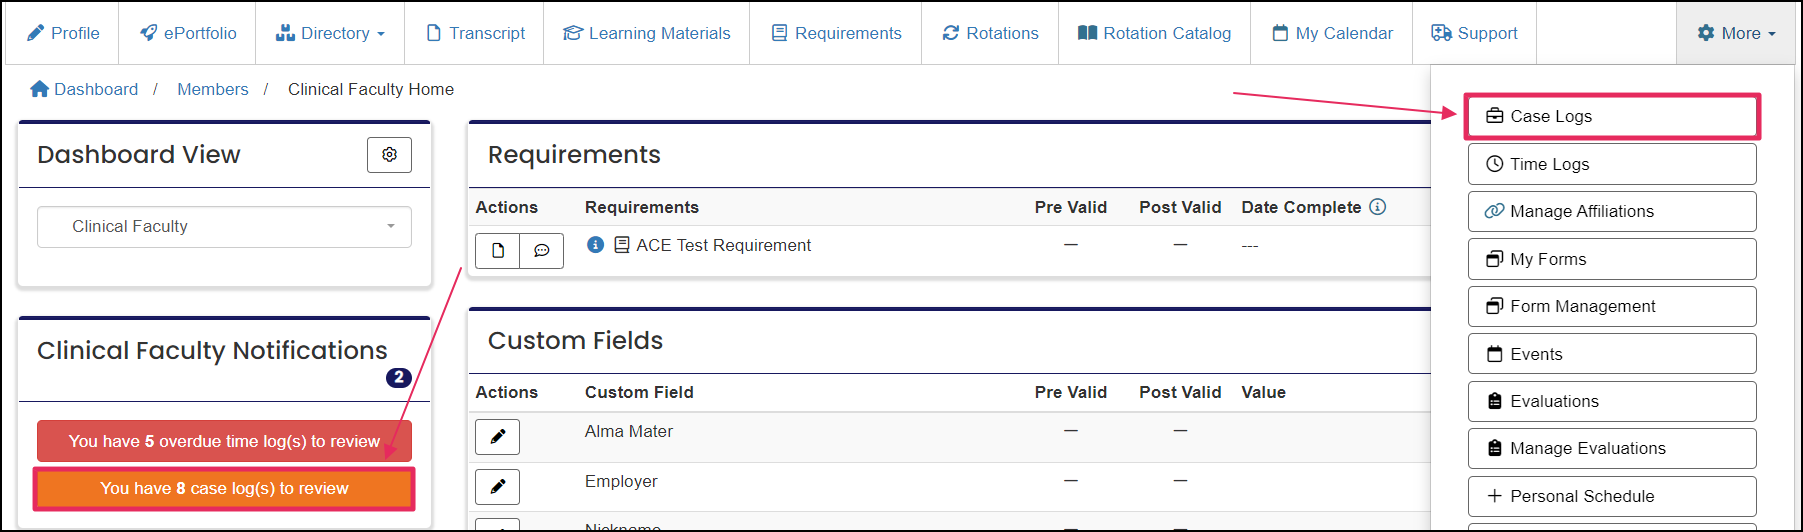 Image pointing to You have case log(s) to review notification under Faculty Notification section and Case Logs tab on features button